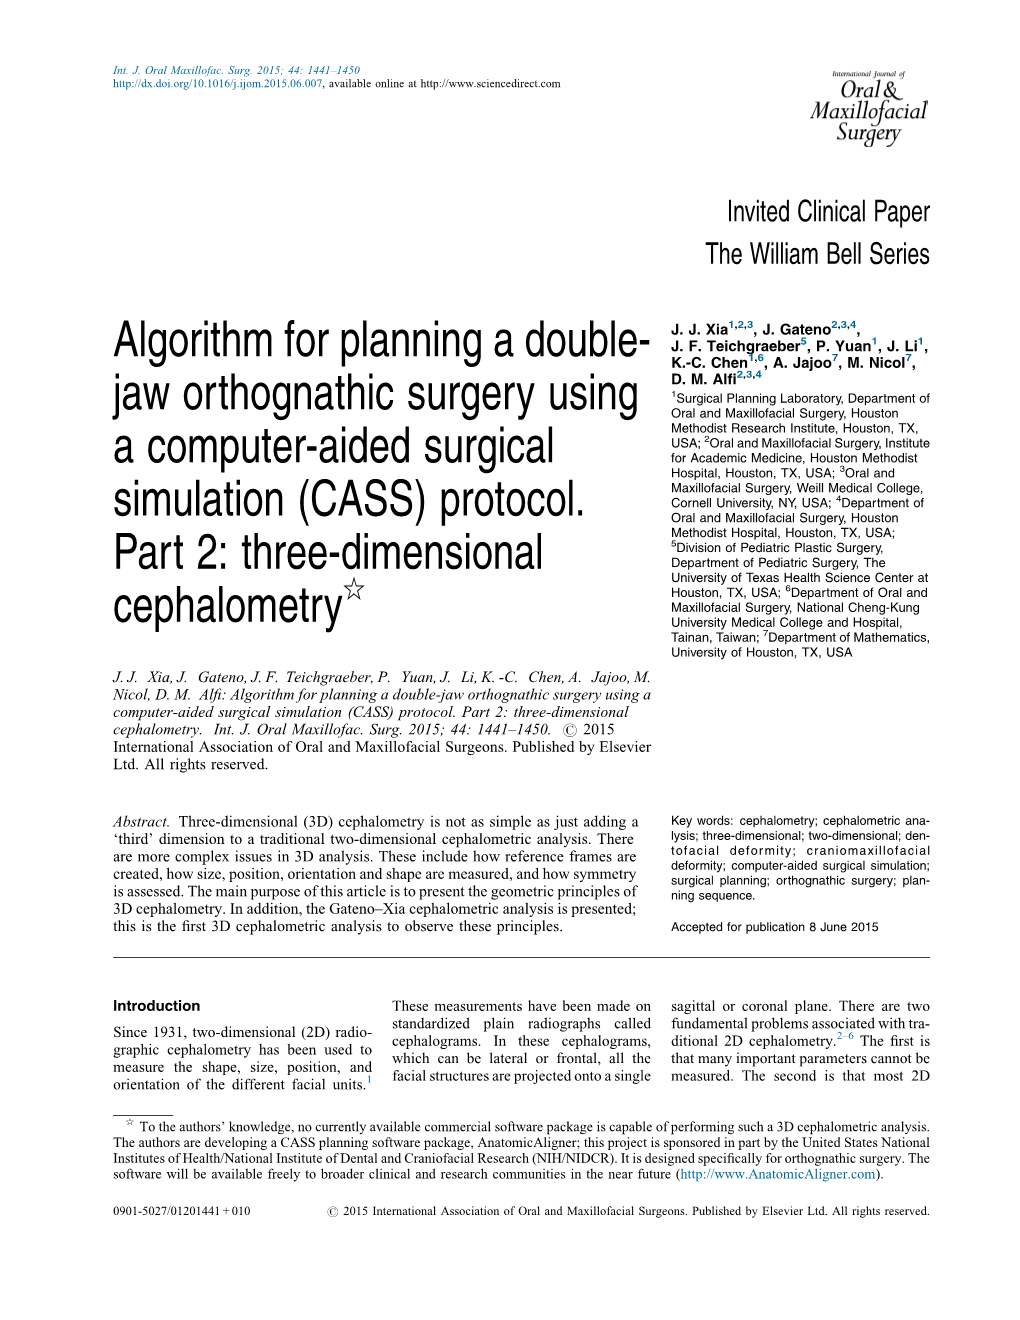 Algorithm for Planning a Double- Jaw Orthognathic Surgery Using a Computer-Aided Surgical Simulation